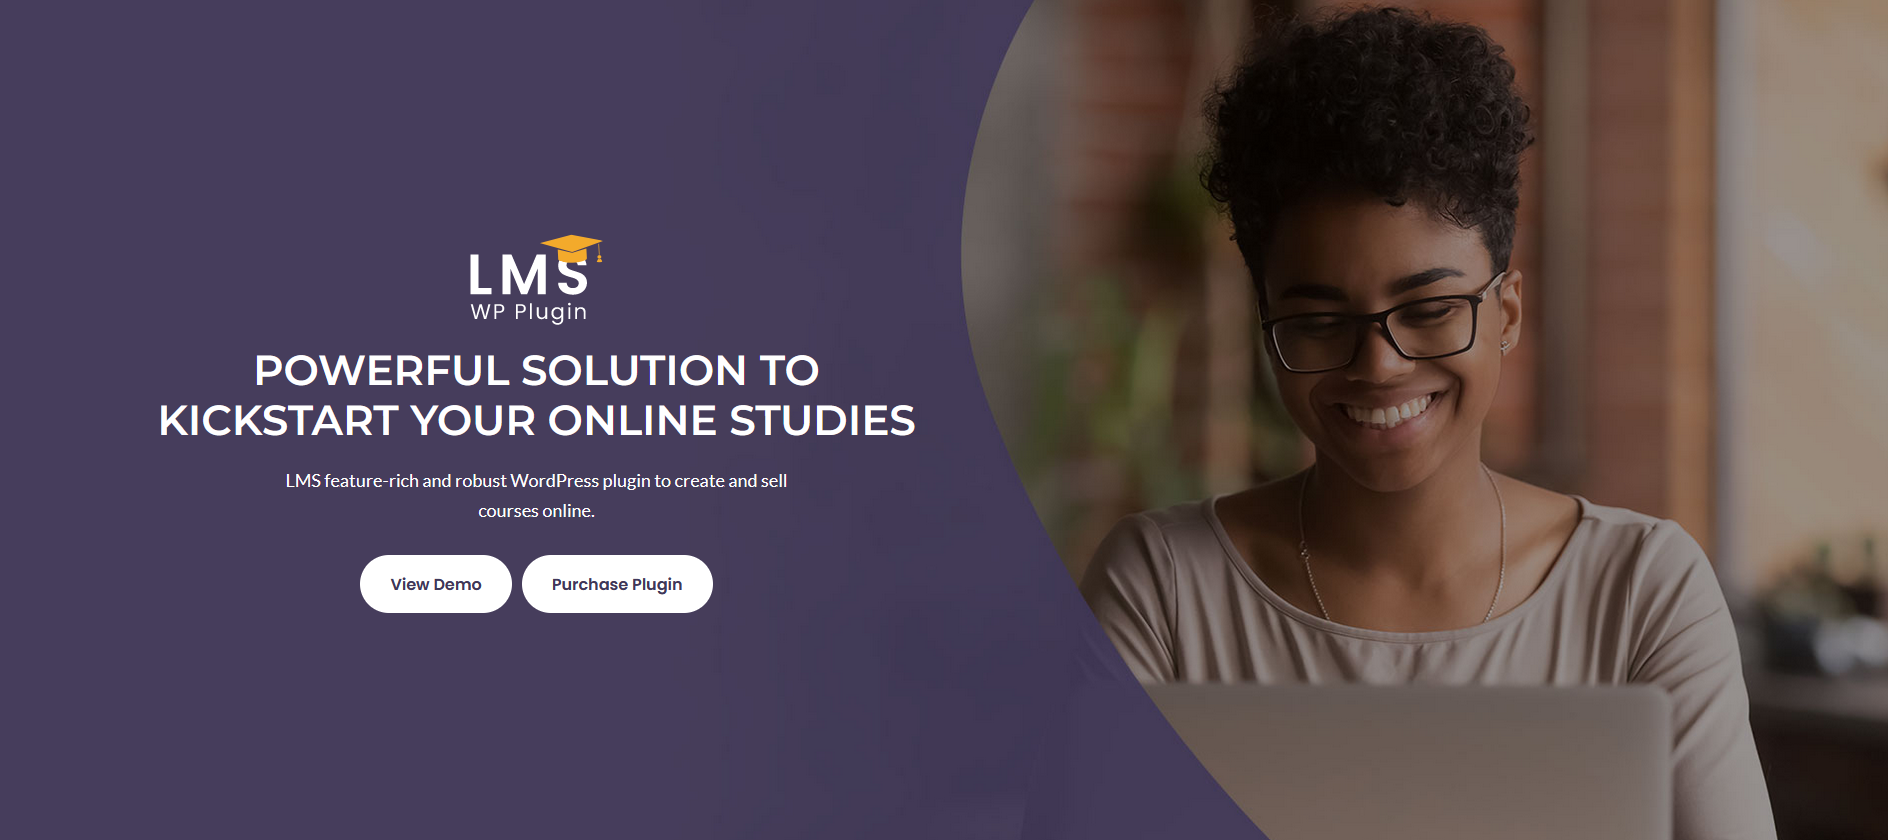 YH -
WP Plugin 5
POWERFUL SOLUTION TO *
KICKSTART YOUR ONLINE STUDIES a

IMS feature: rich and robust WordPress plugin to create and sell

courses online.

View Domo Purchase Plugin